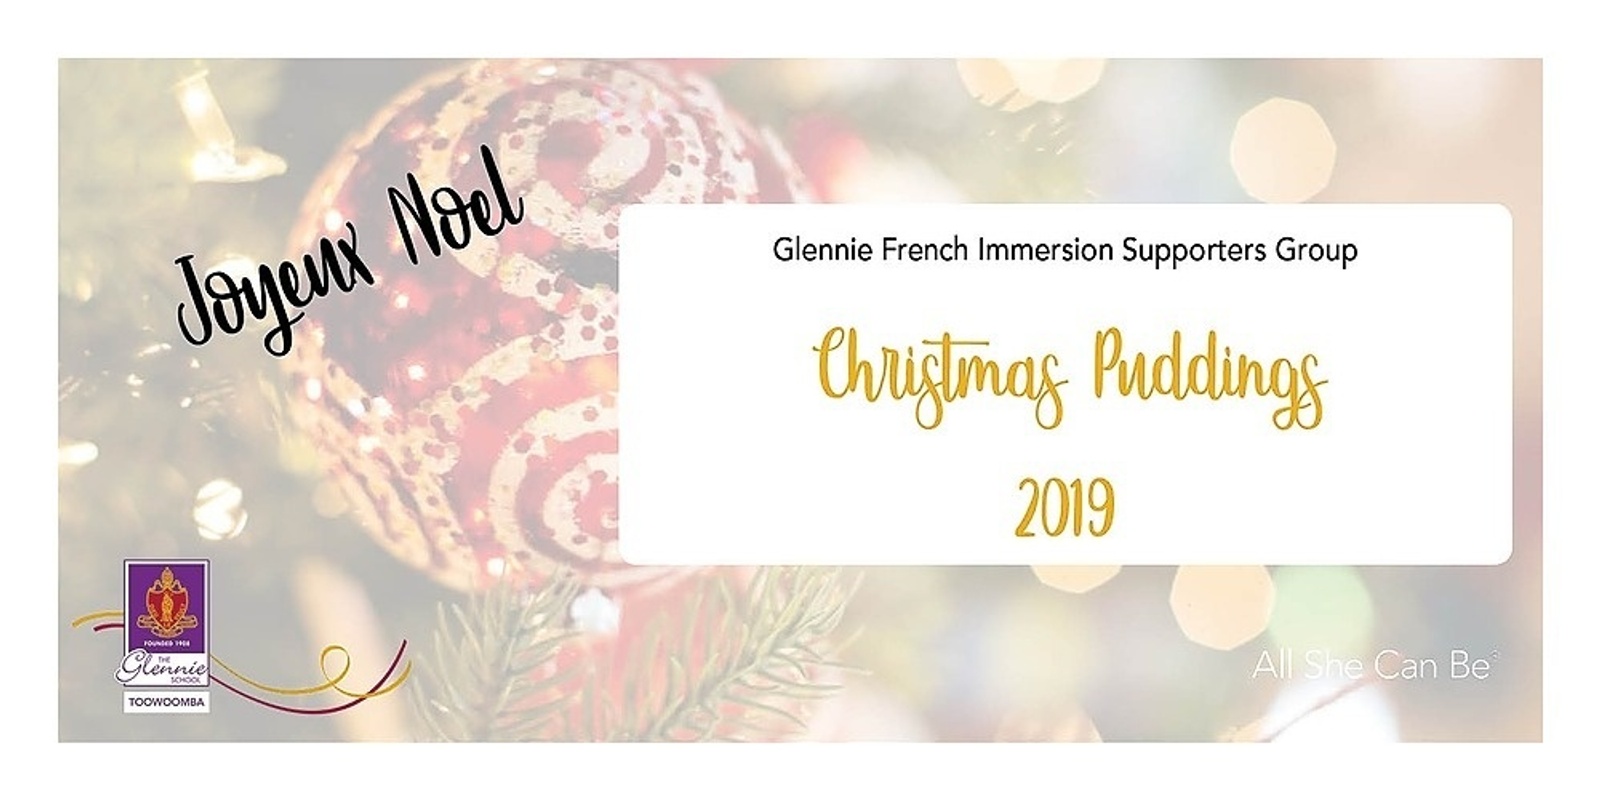 Banner image for Glennie French Immersion Christmas Pudding Drive